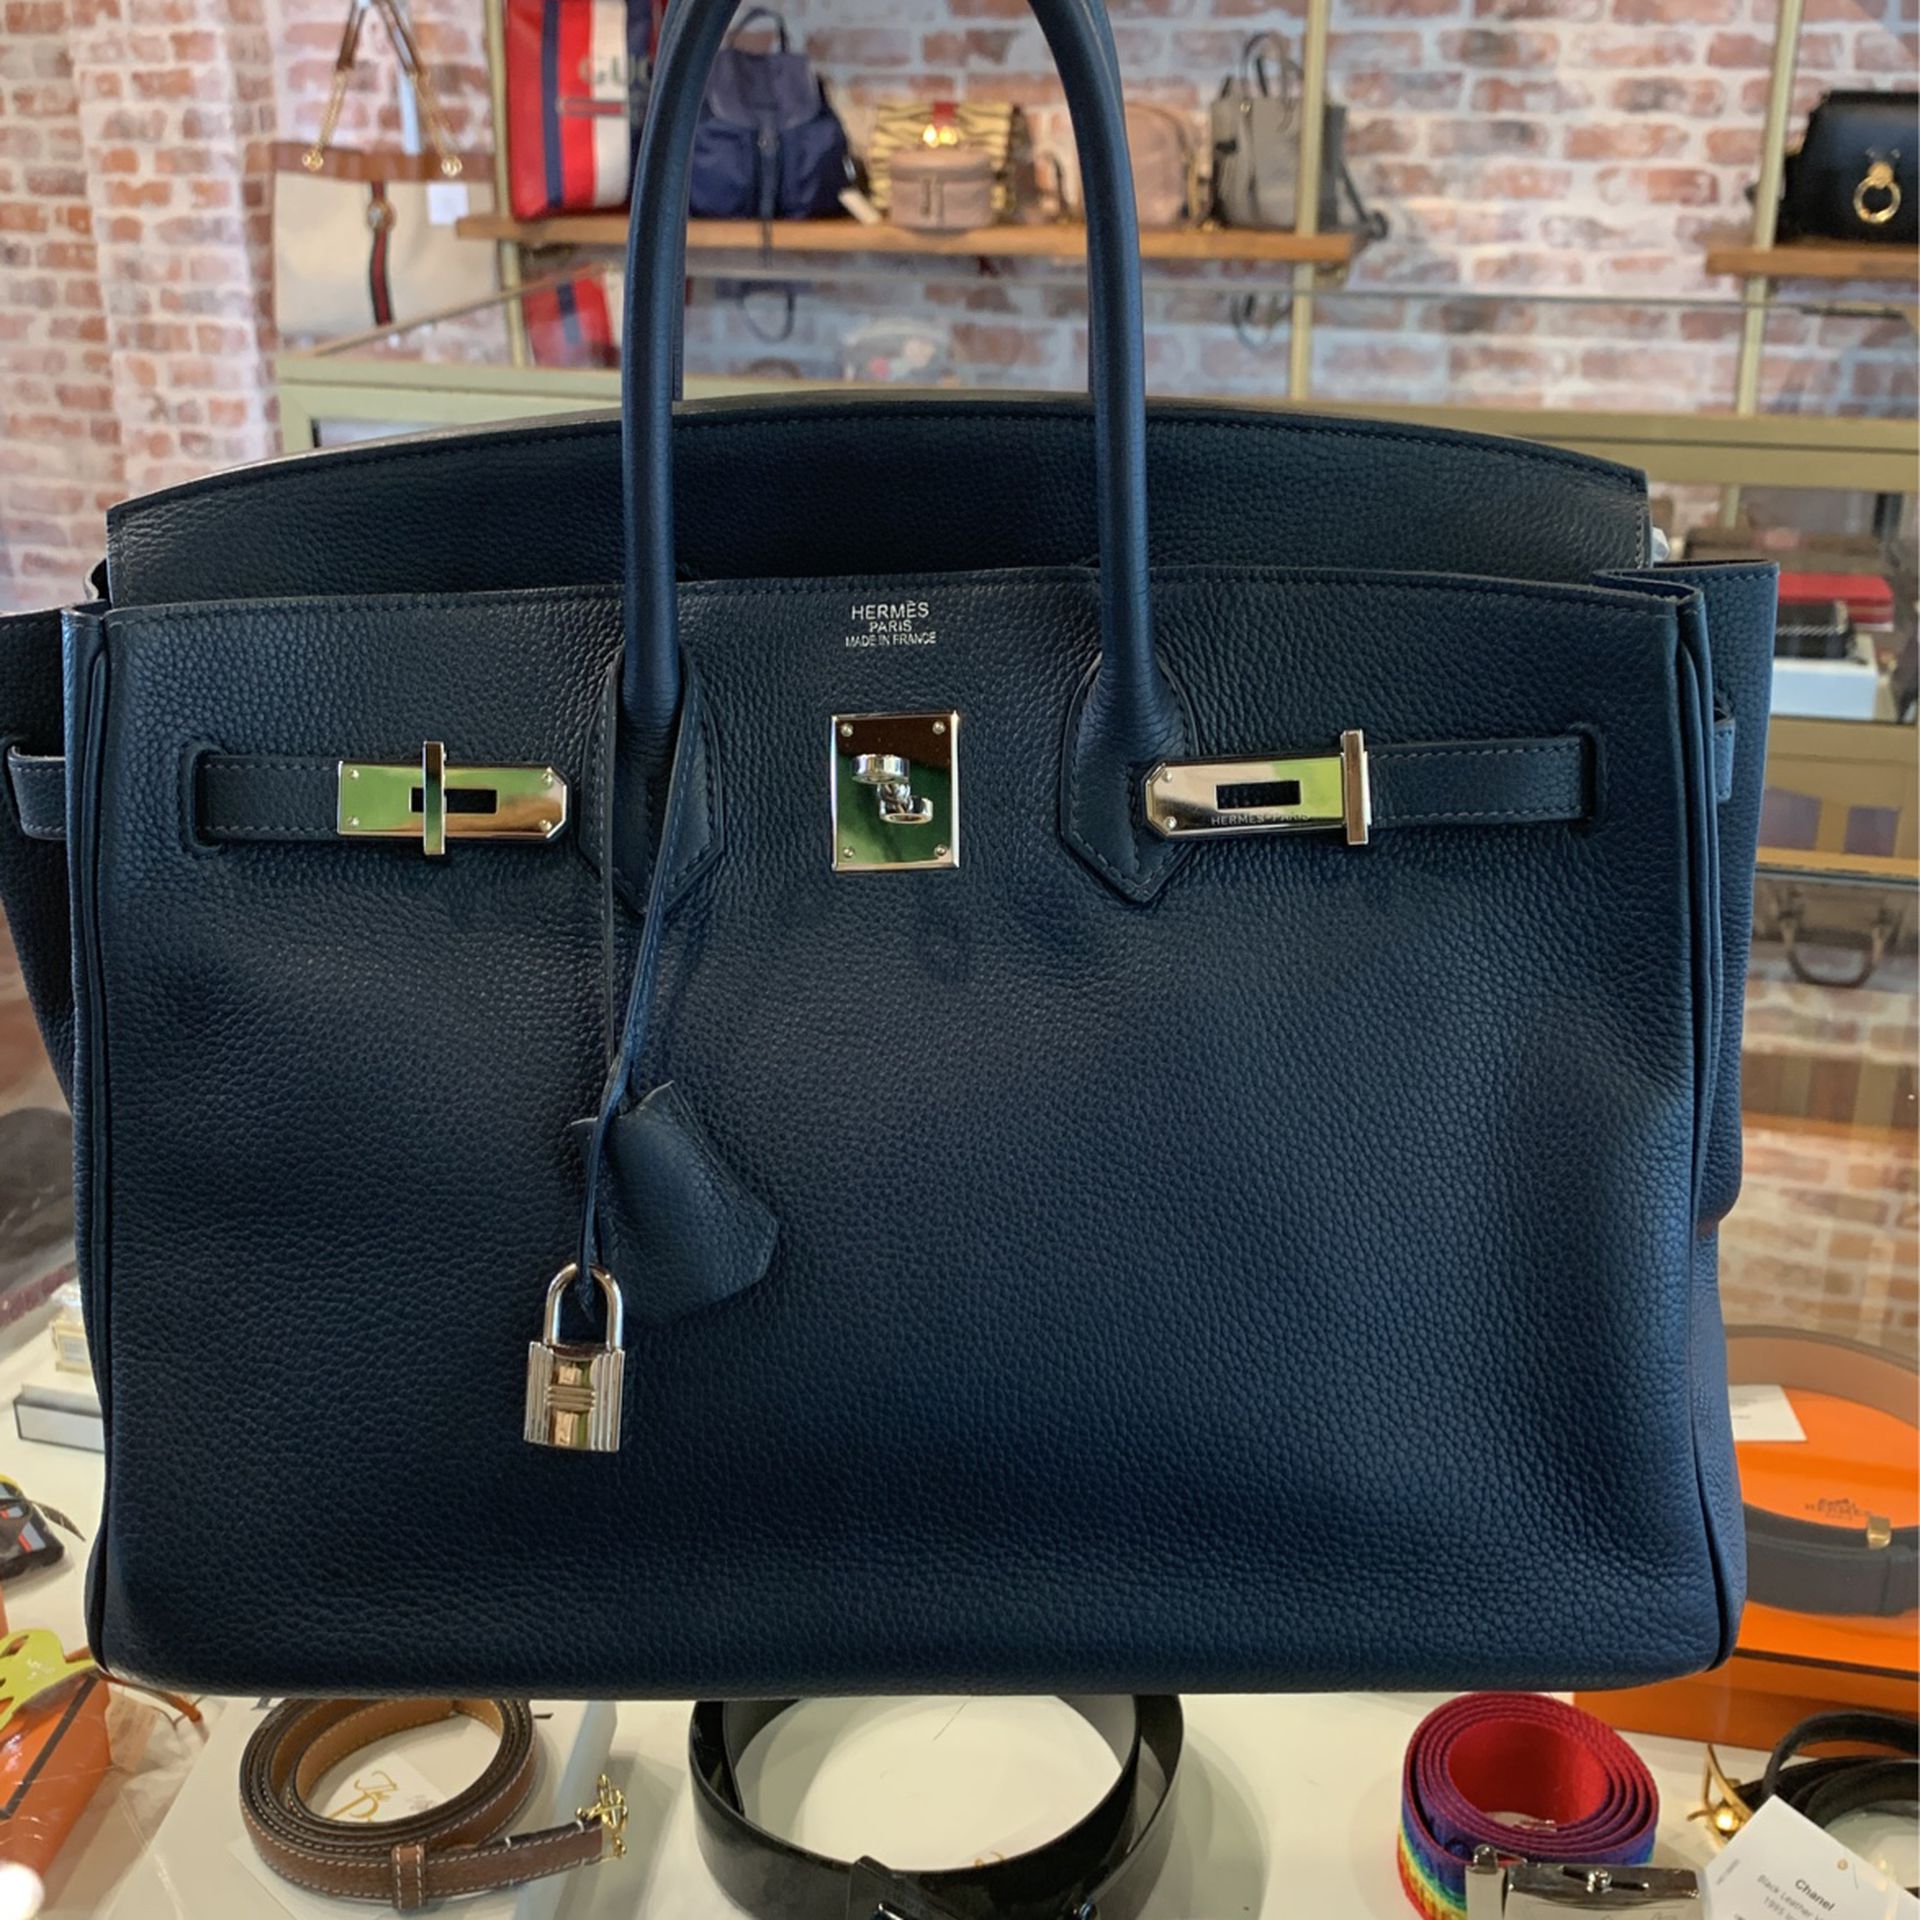 Hermes Birkin Bags 84 Not Used for Sale in Passaic, NJ - OfferUp